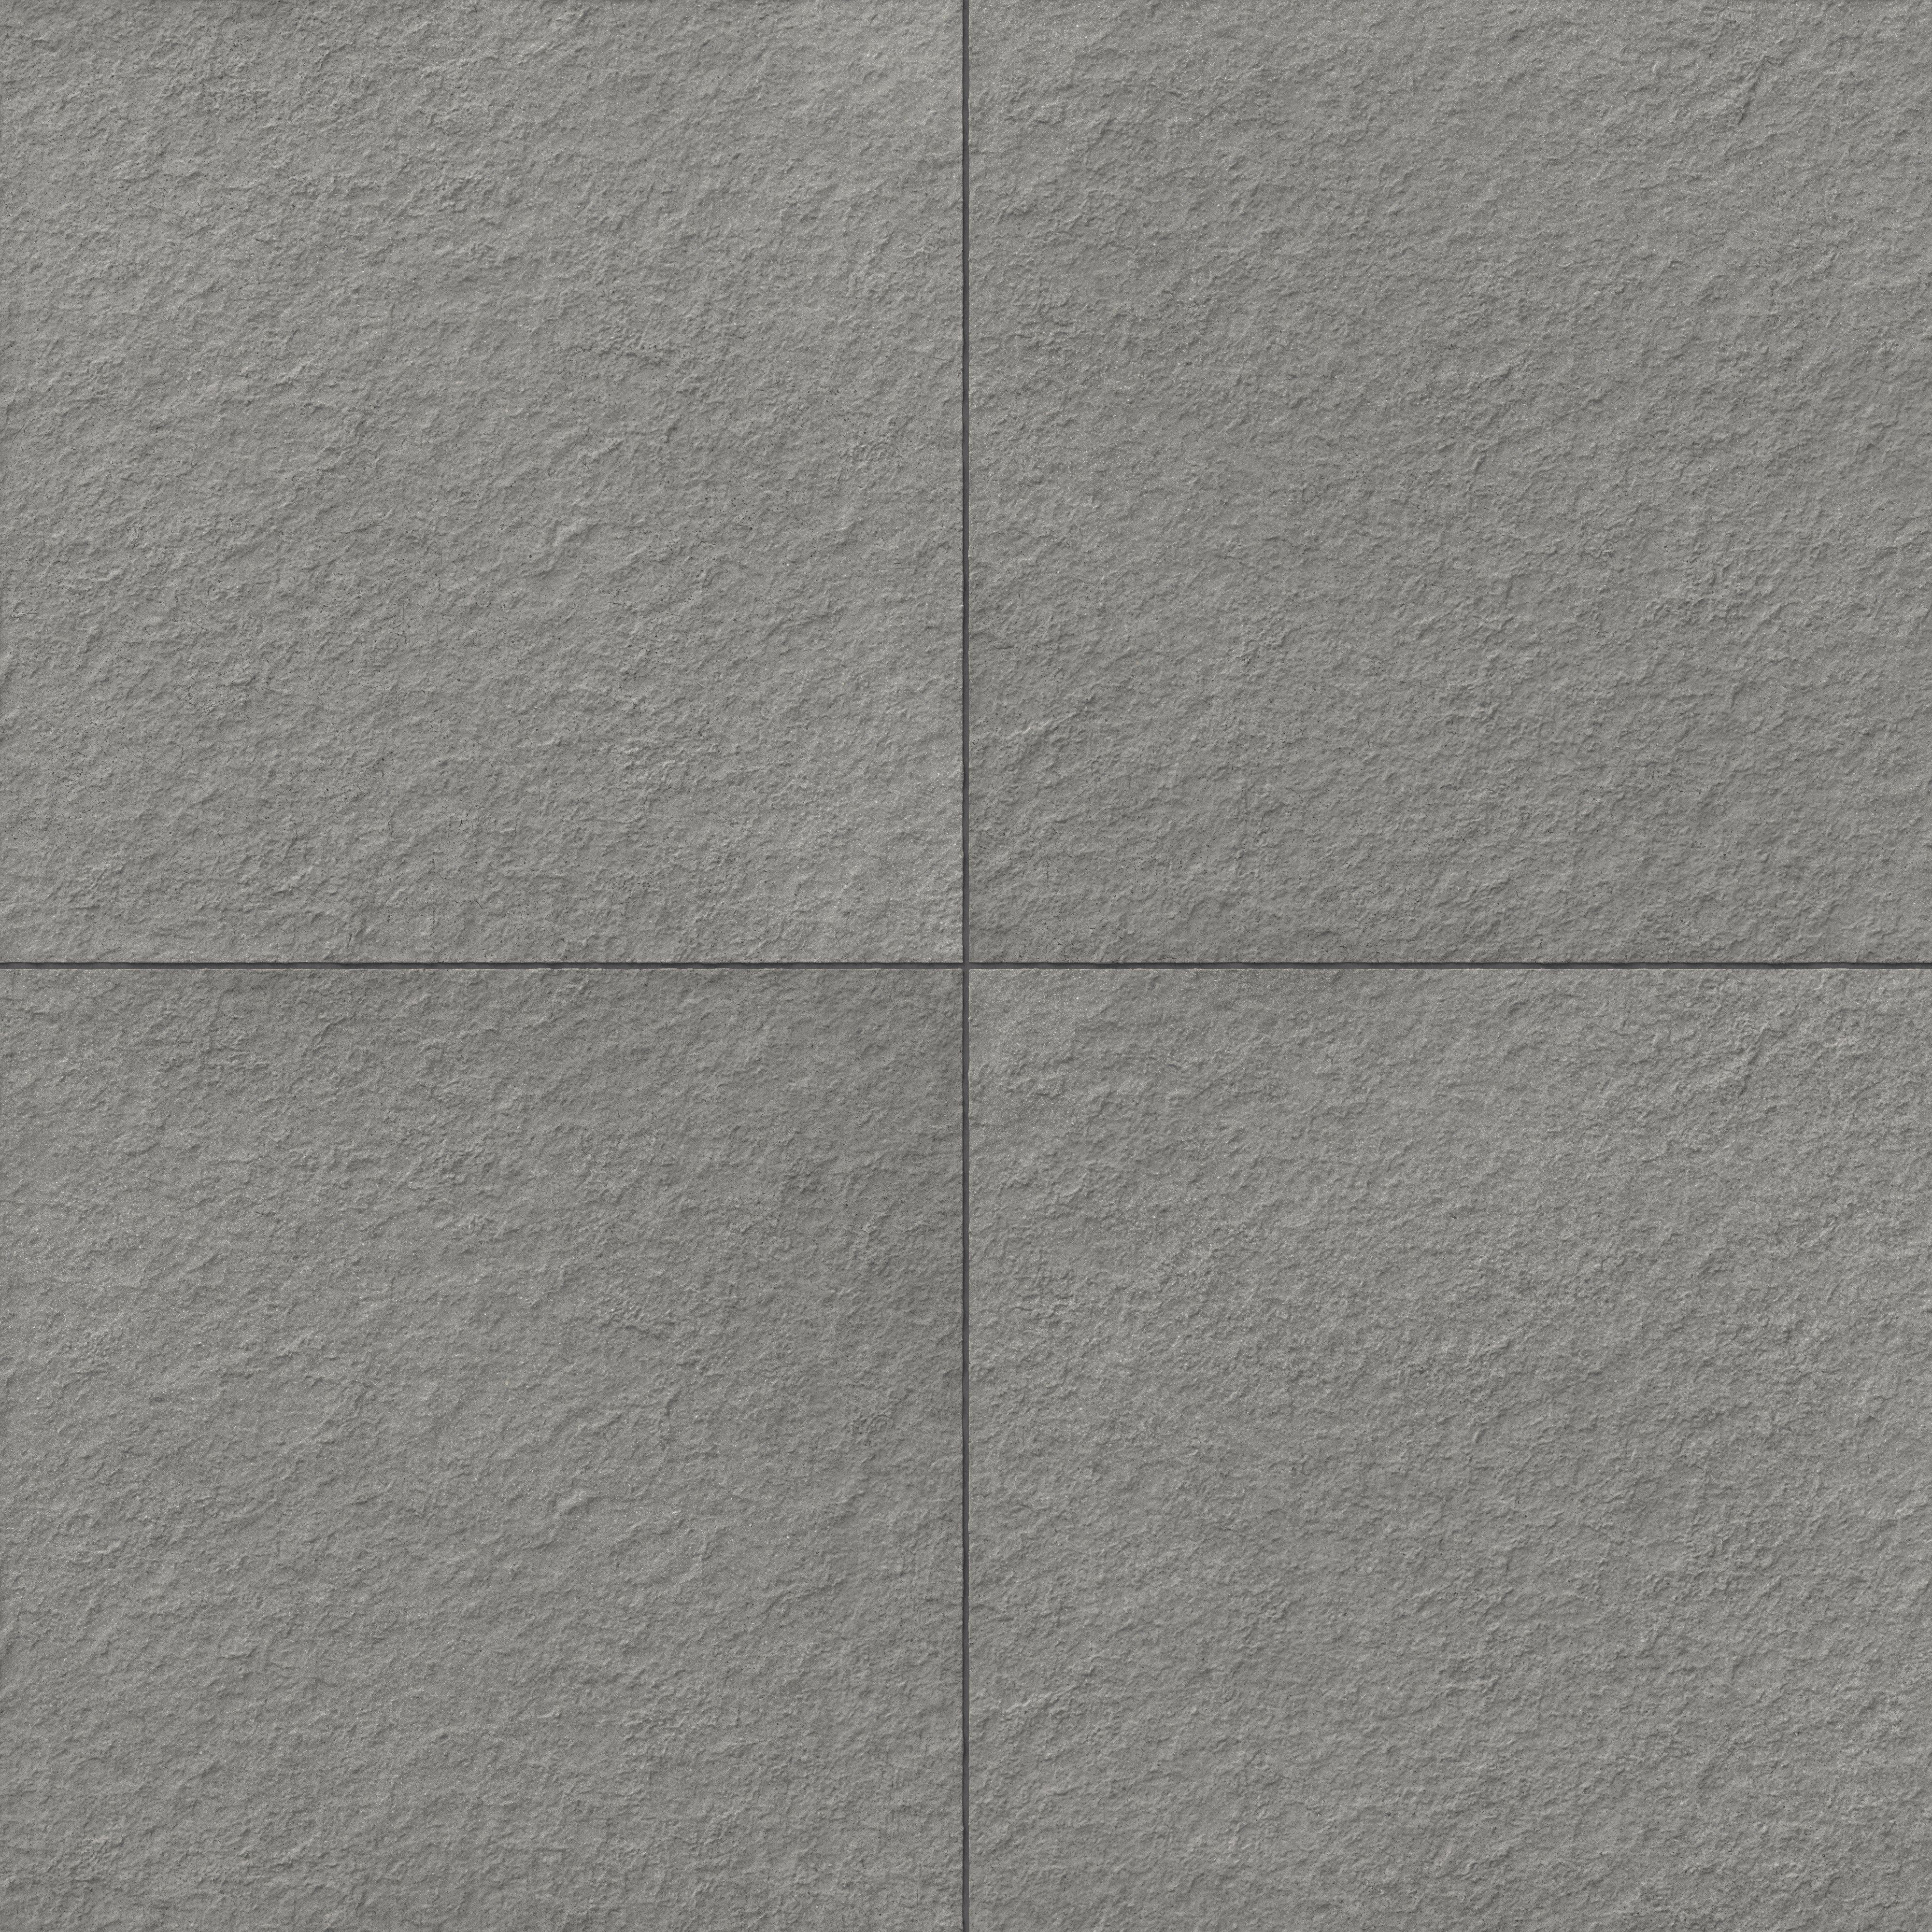 Palmer 24x24 Raw Porcelain Tile in Charcoal